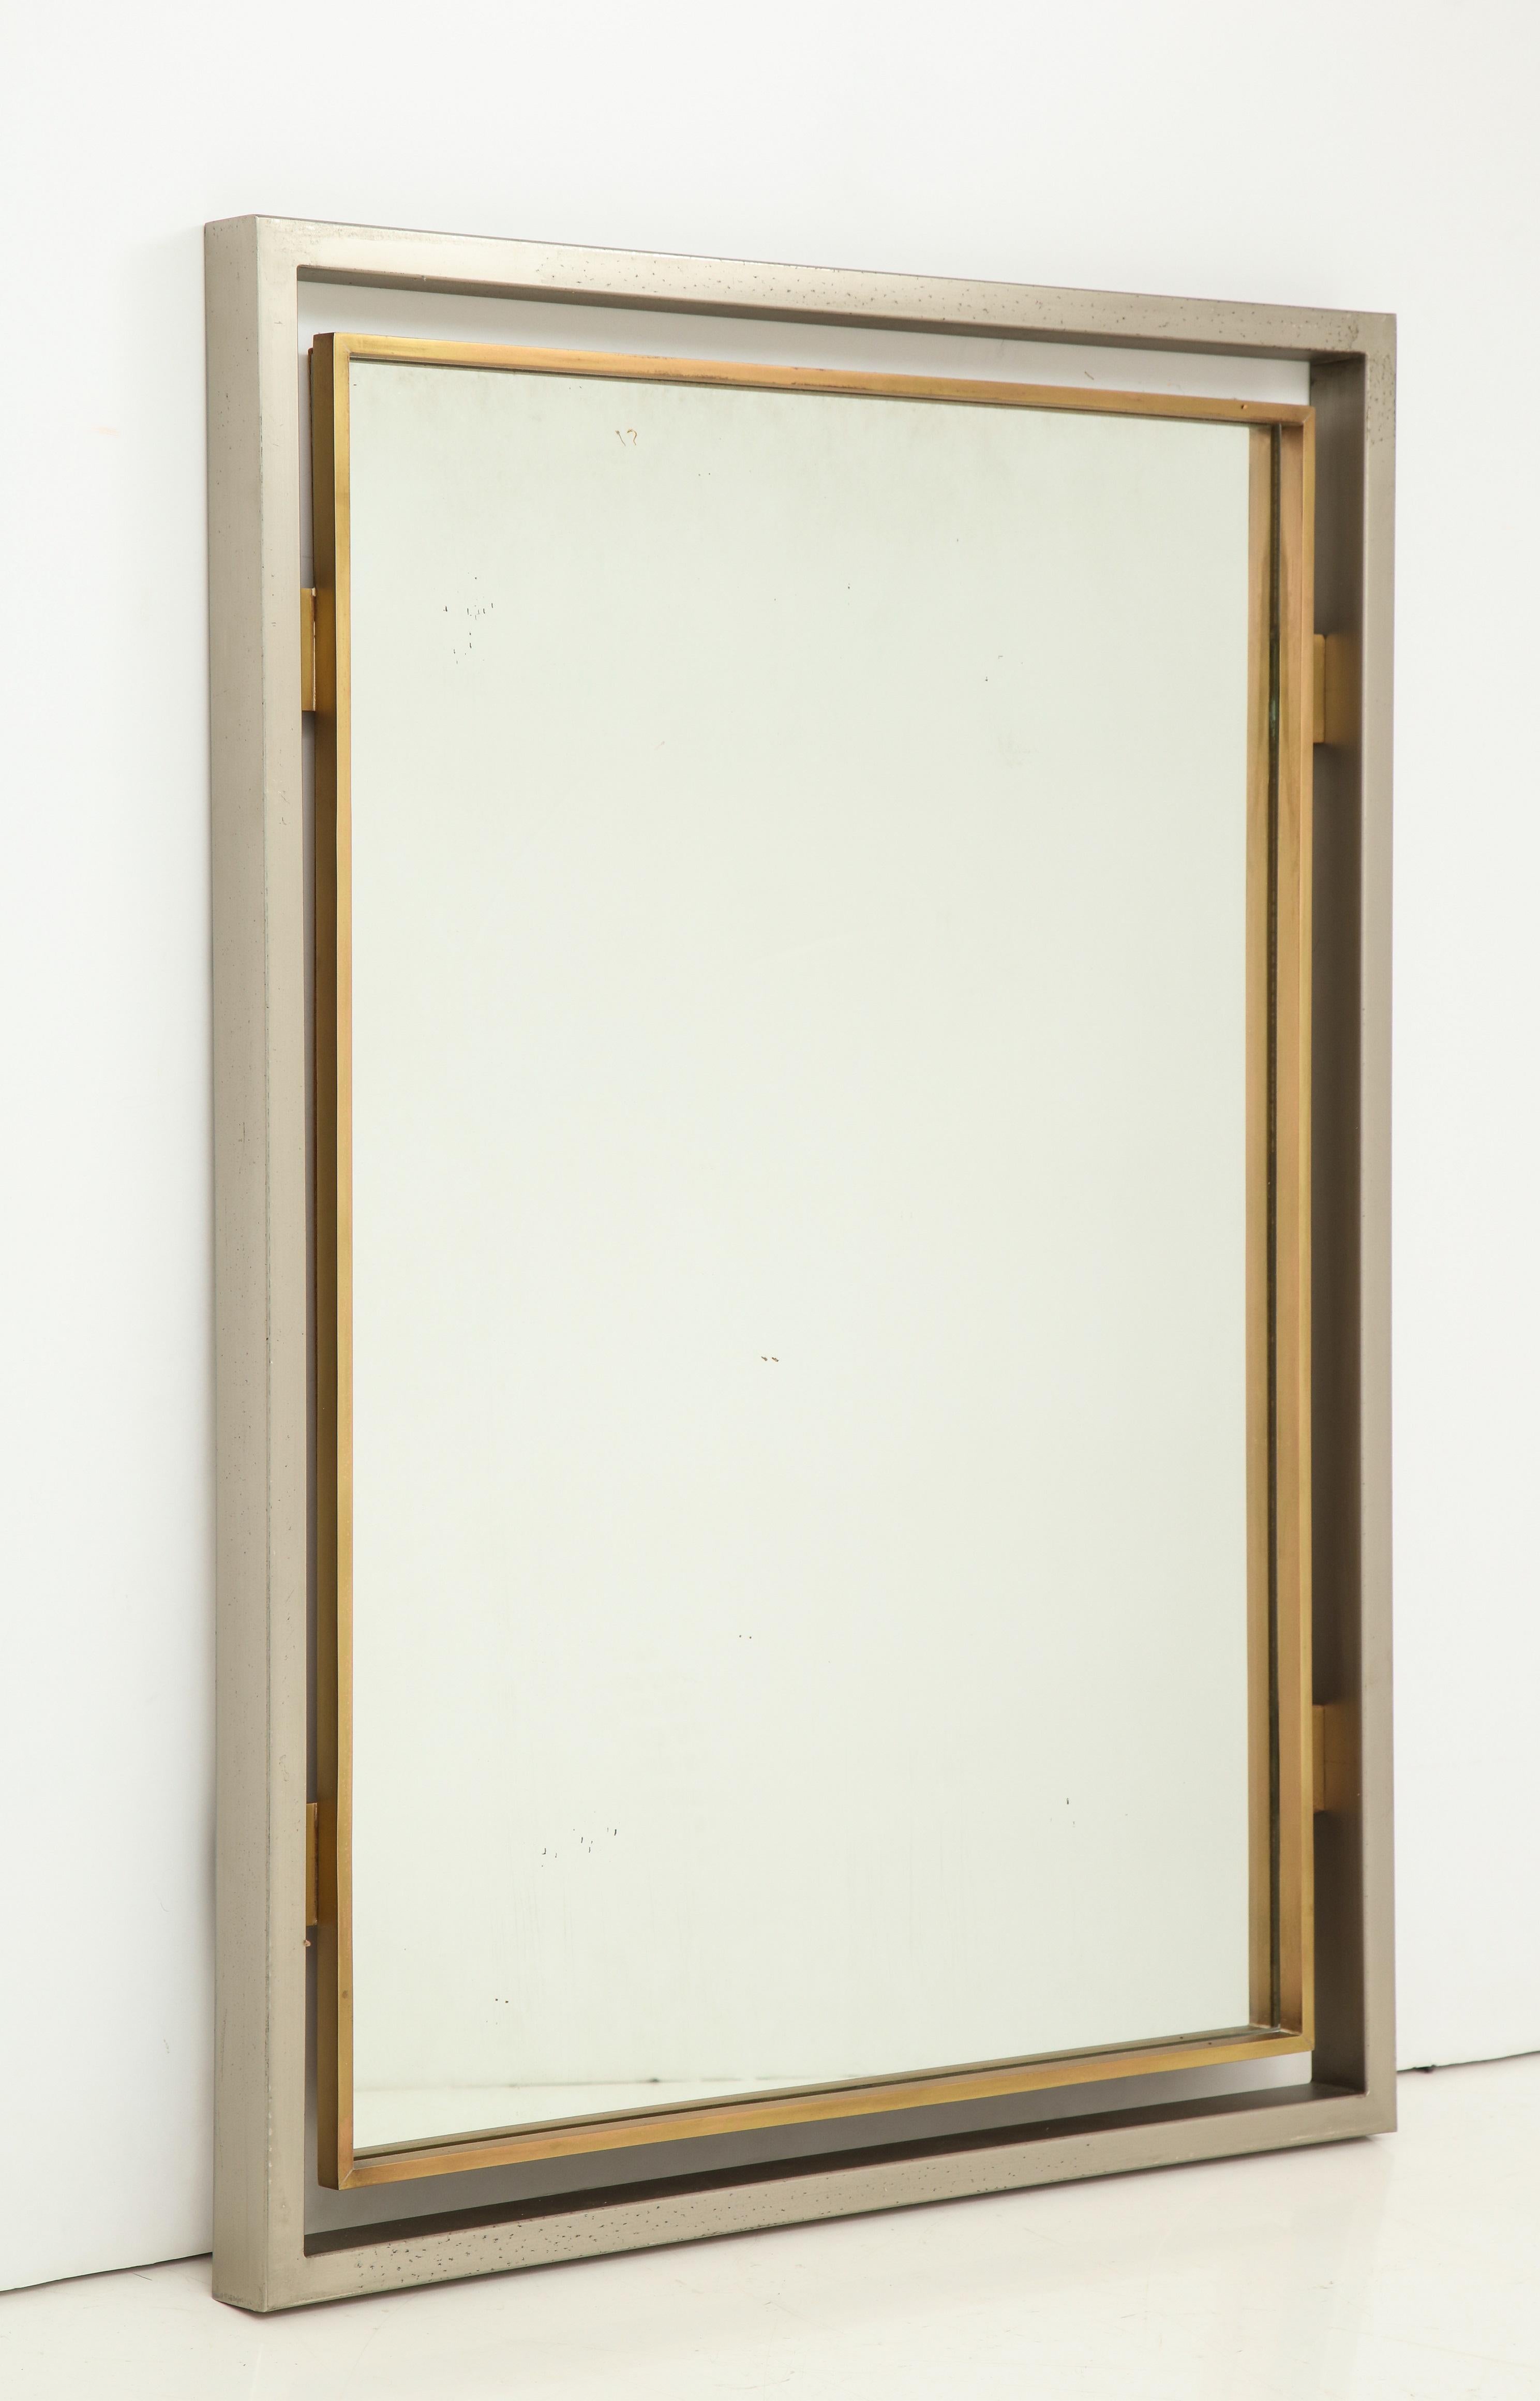 Plated French 1970s Modernist Mirror by Guy Lefevre for Maison Jansen